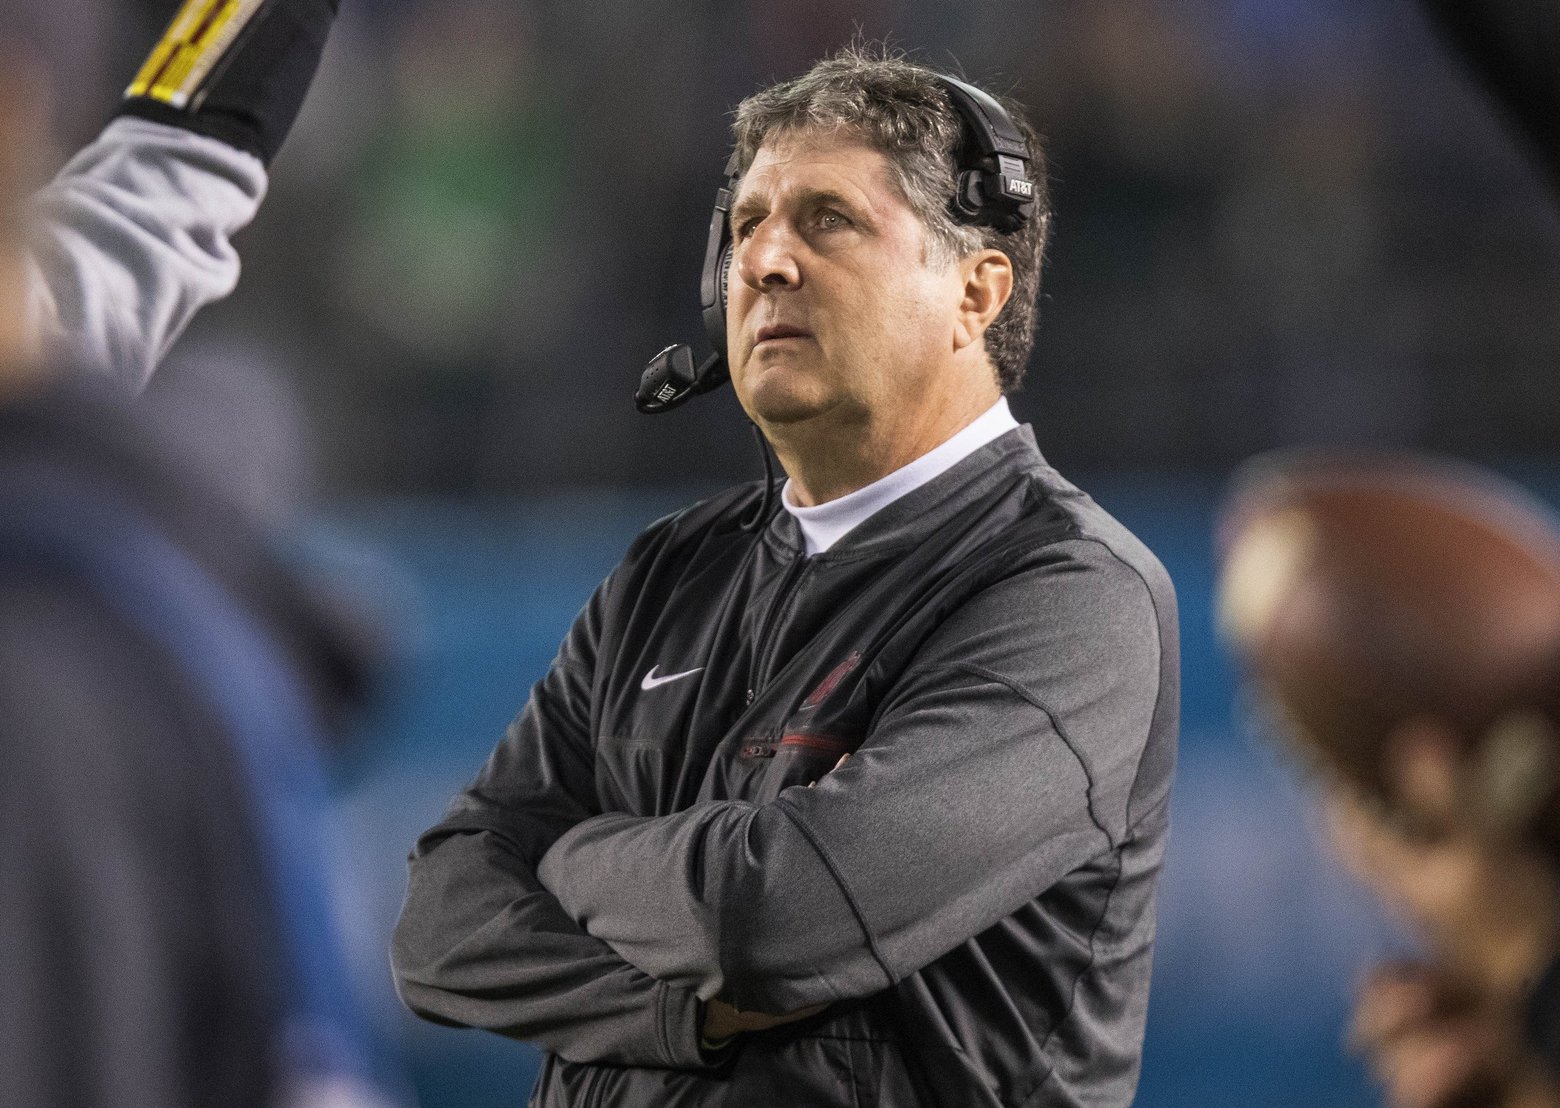 Academy Alumnus Mike Leach Named Mississippi State Head Football Coach